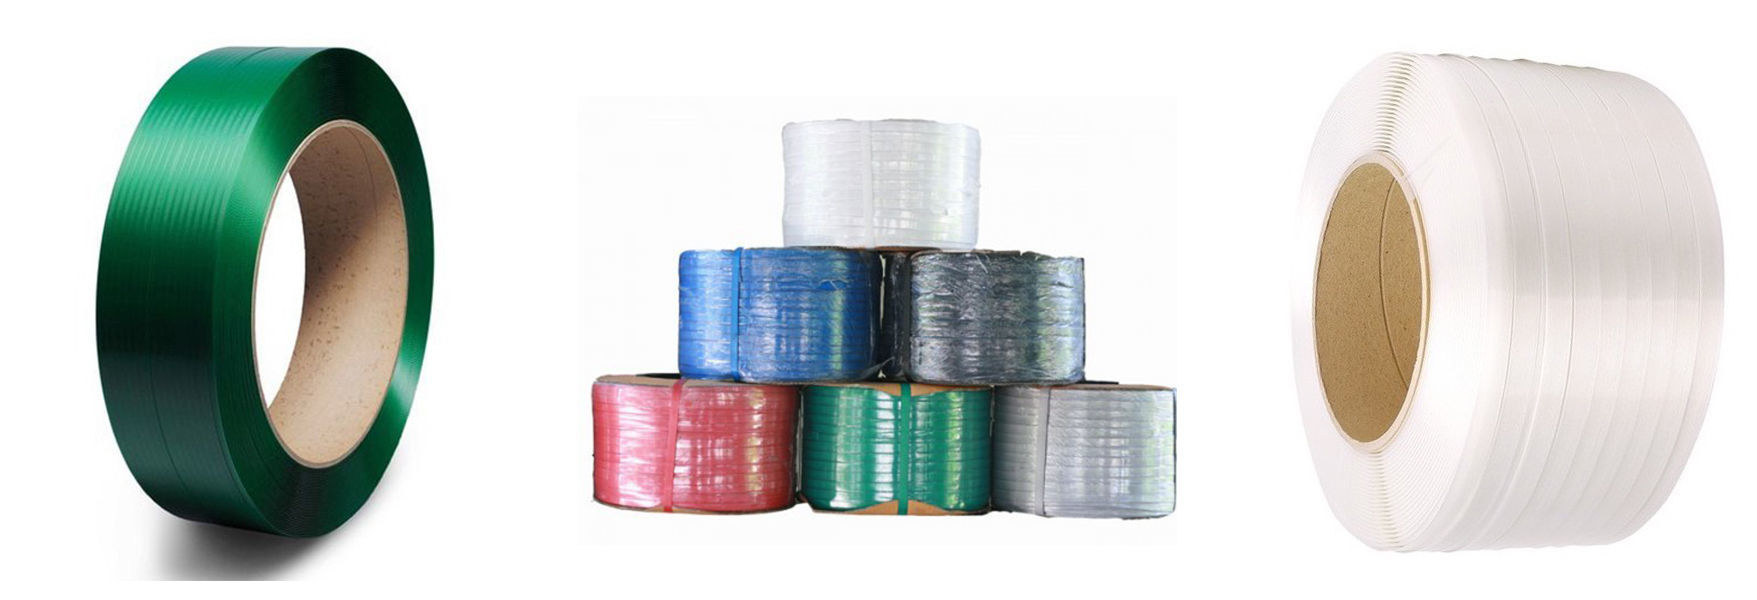 Plastic Strapping, STEEL STRAPPING